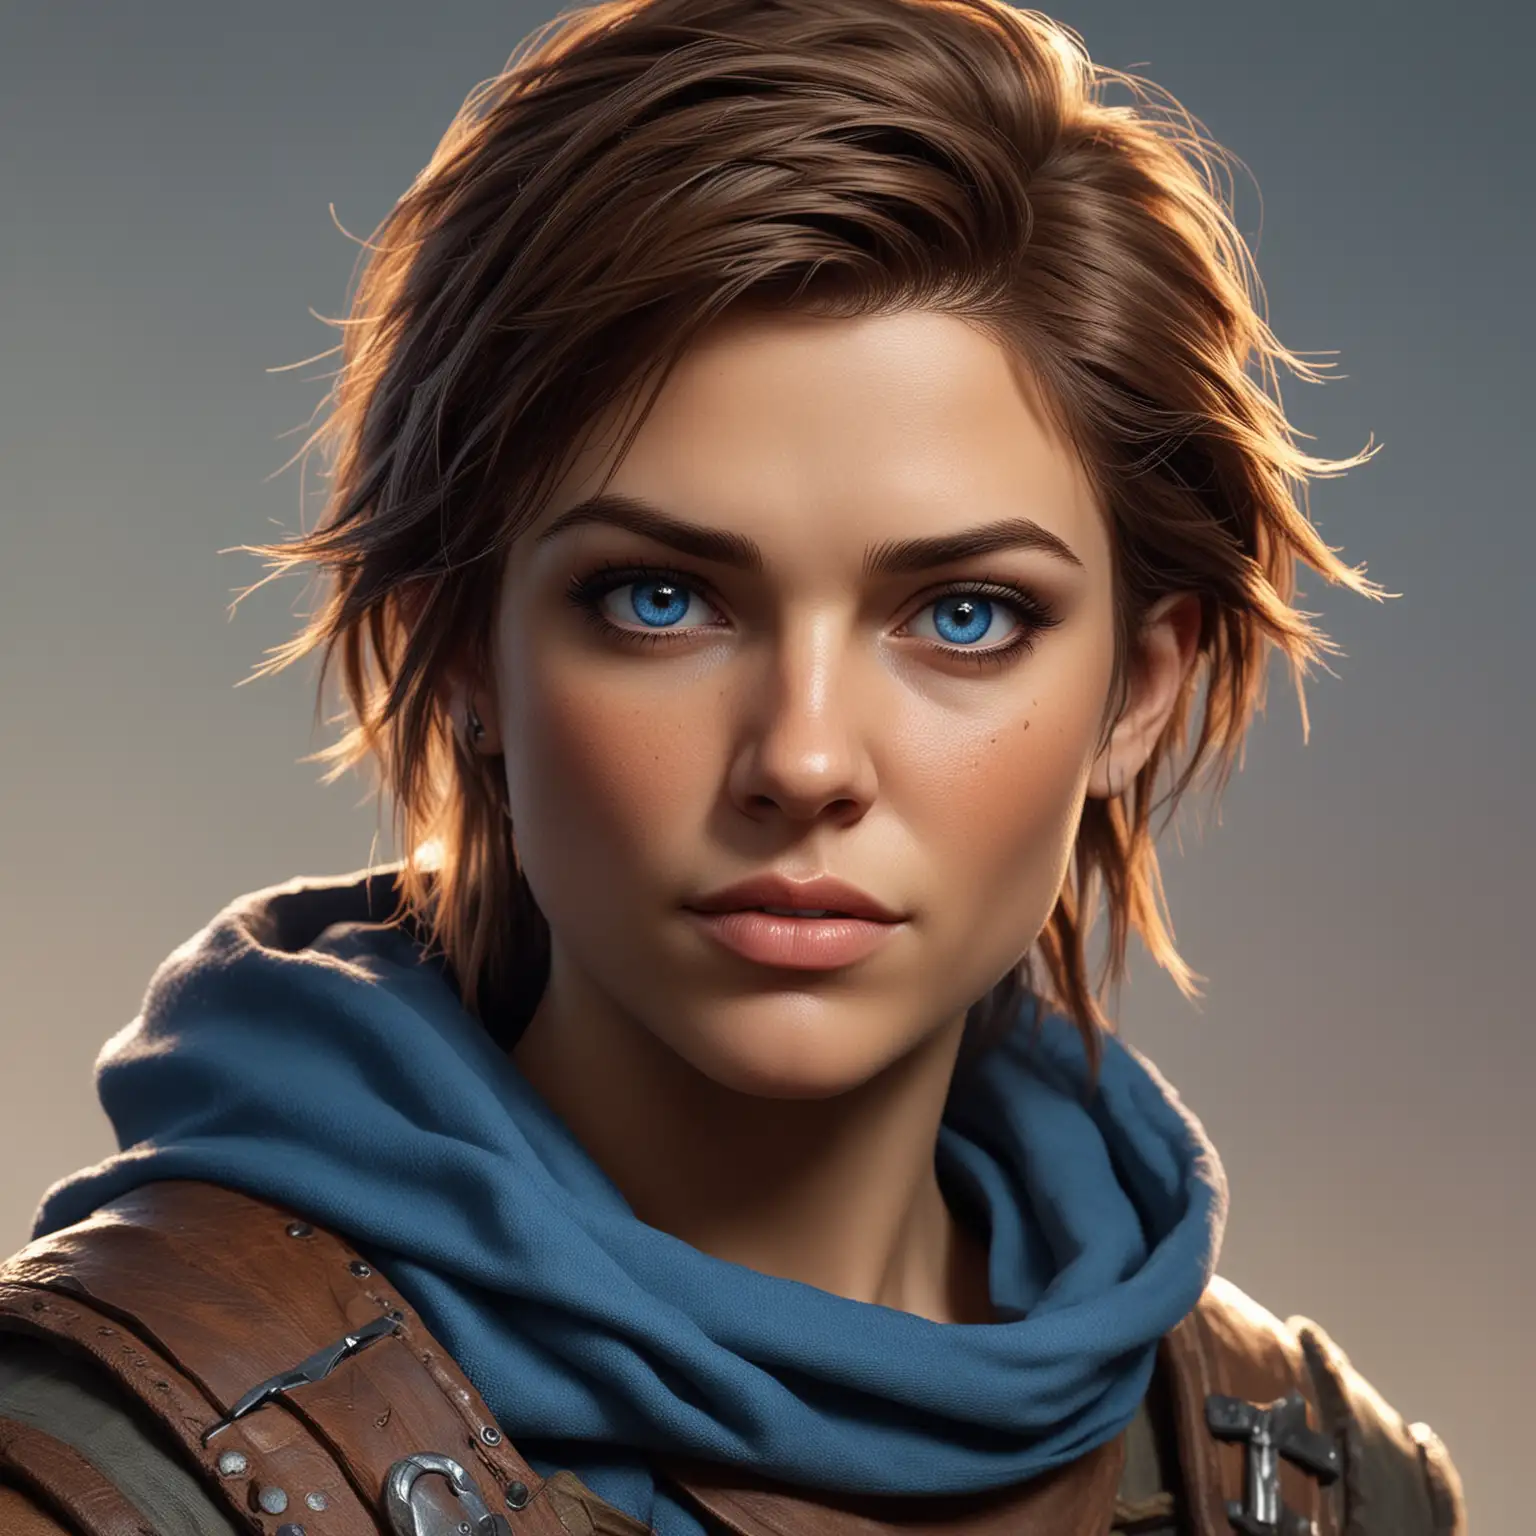 Andrea as a Rugged female rogue D&D character, short sandy brown hair, bright blue eyes, masculine face, average level of beauty, plain facial features